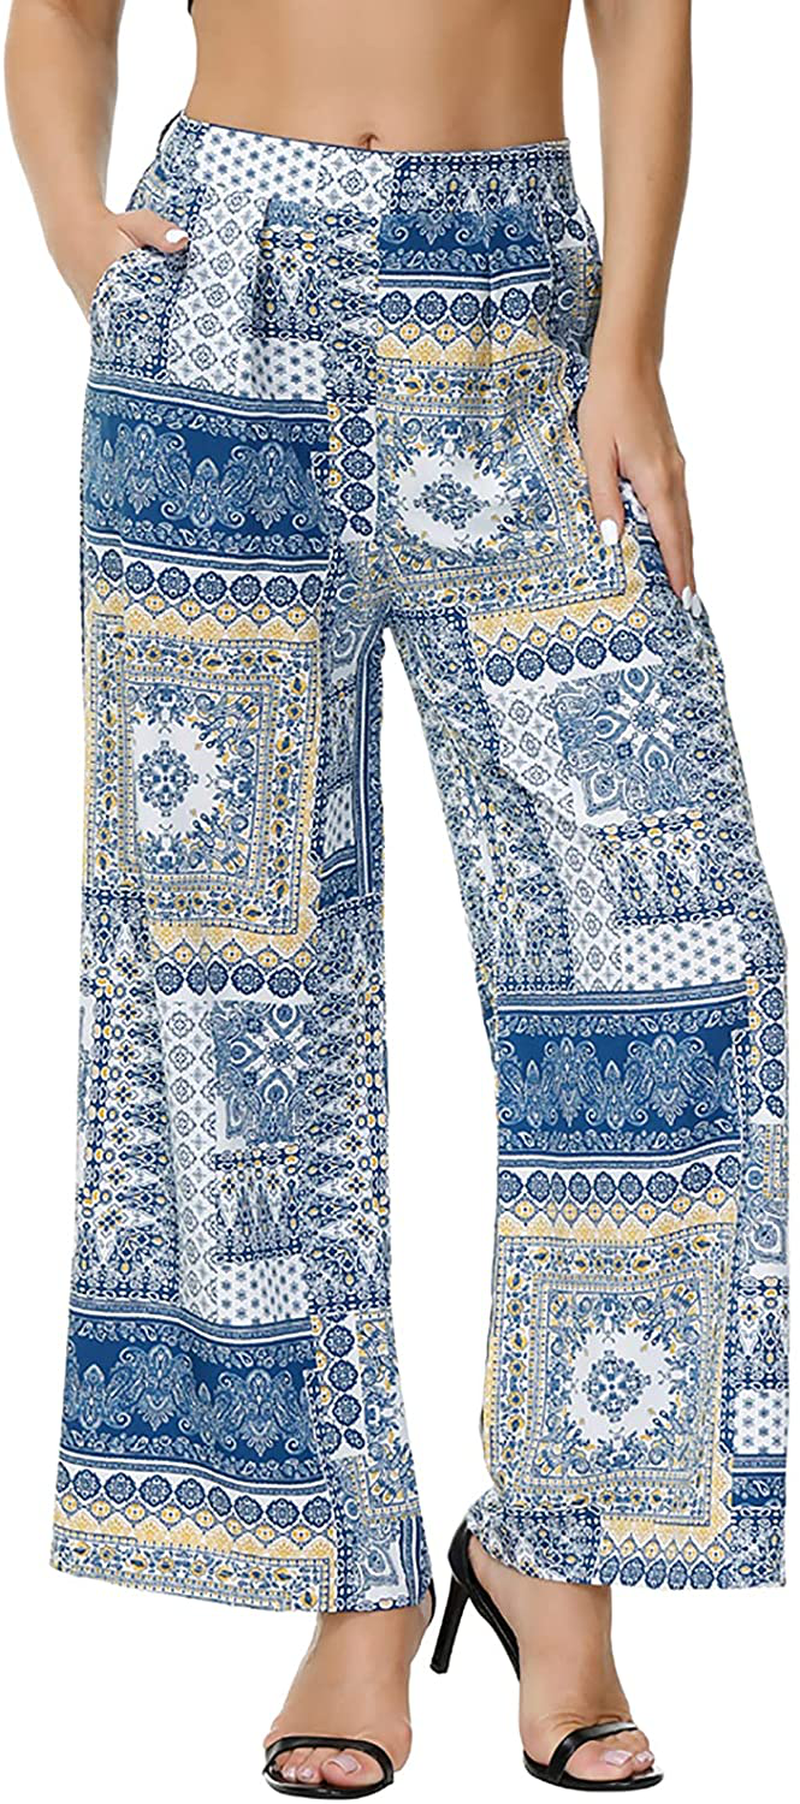 Zexxxy Womens Paisley Printed Wide Leg Pants Elastic Waist Casual Trousers with Pockets Loose Comfy Bottoms